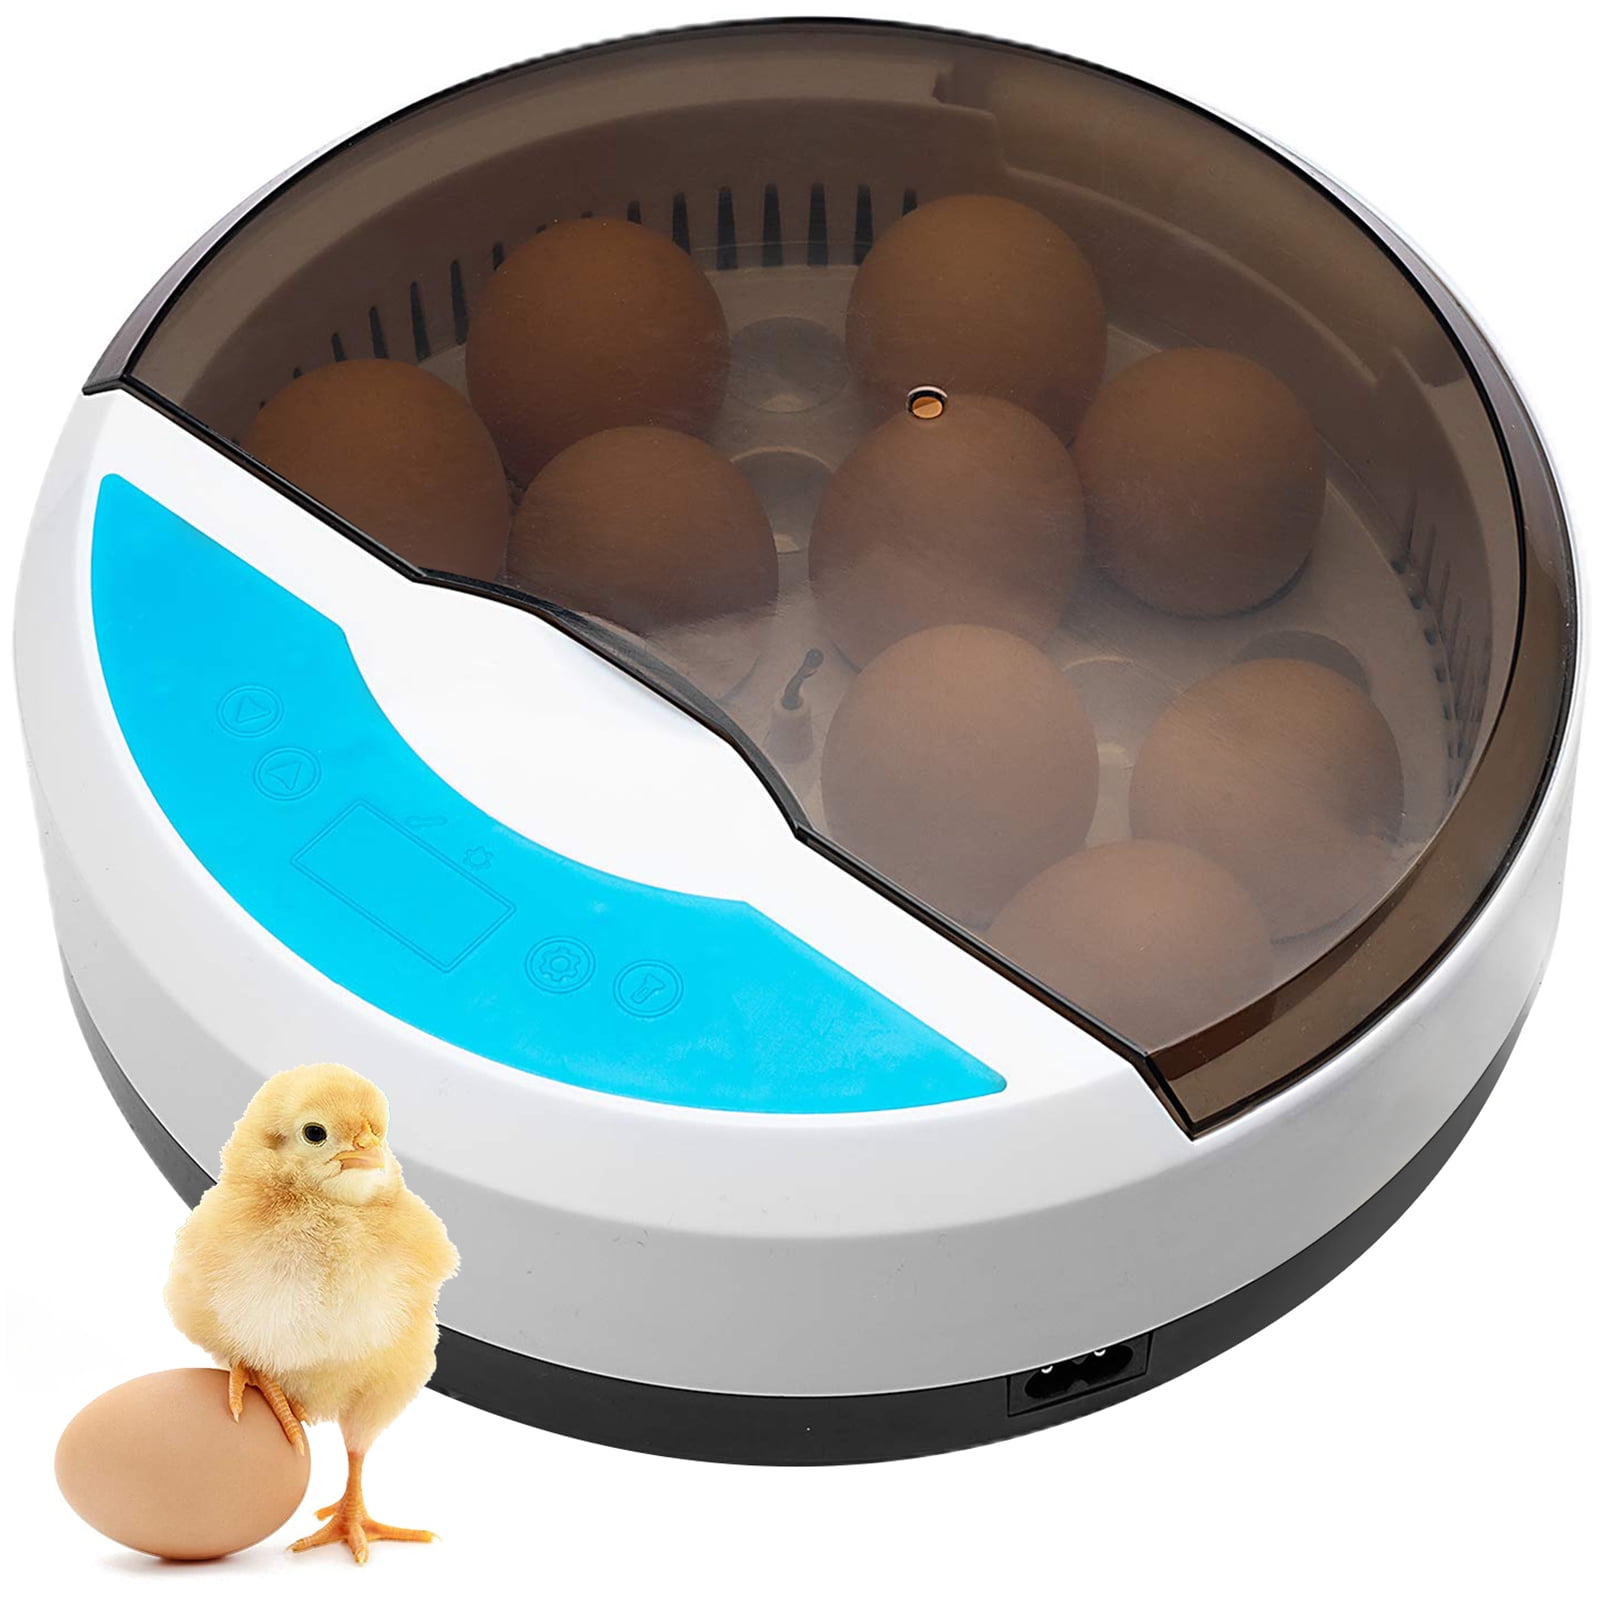 Egg Tester Candler Plans DIY Ovoscope For Hatching Eggs – The Best